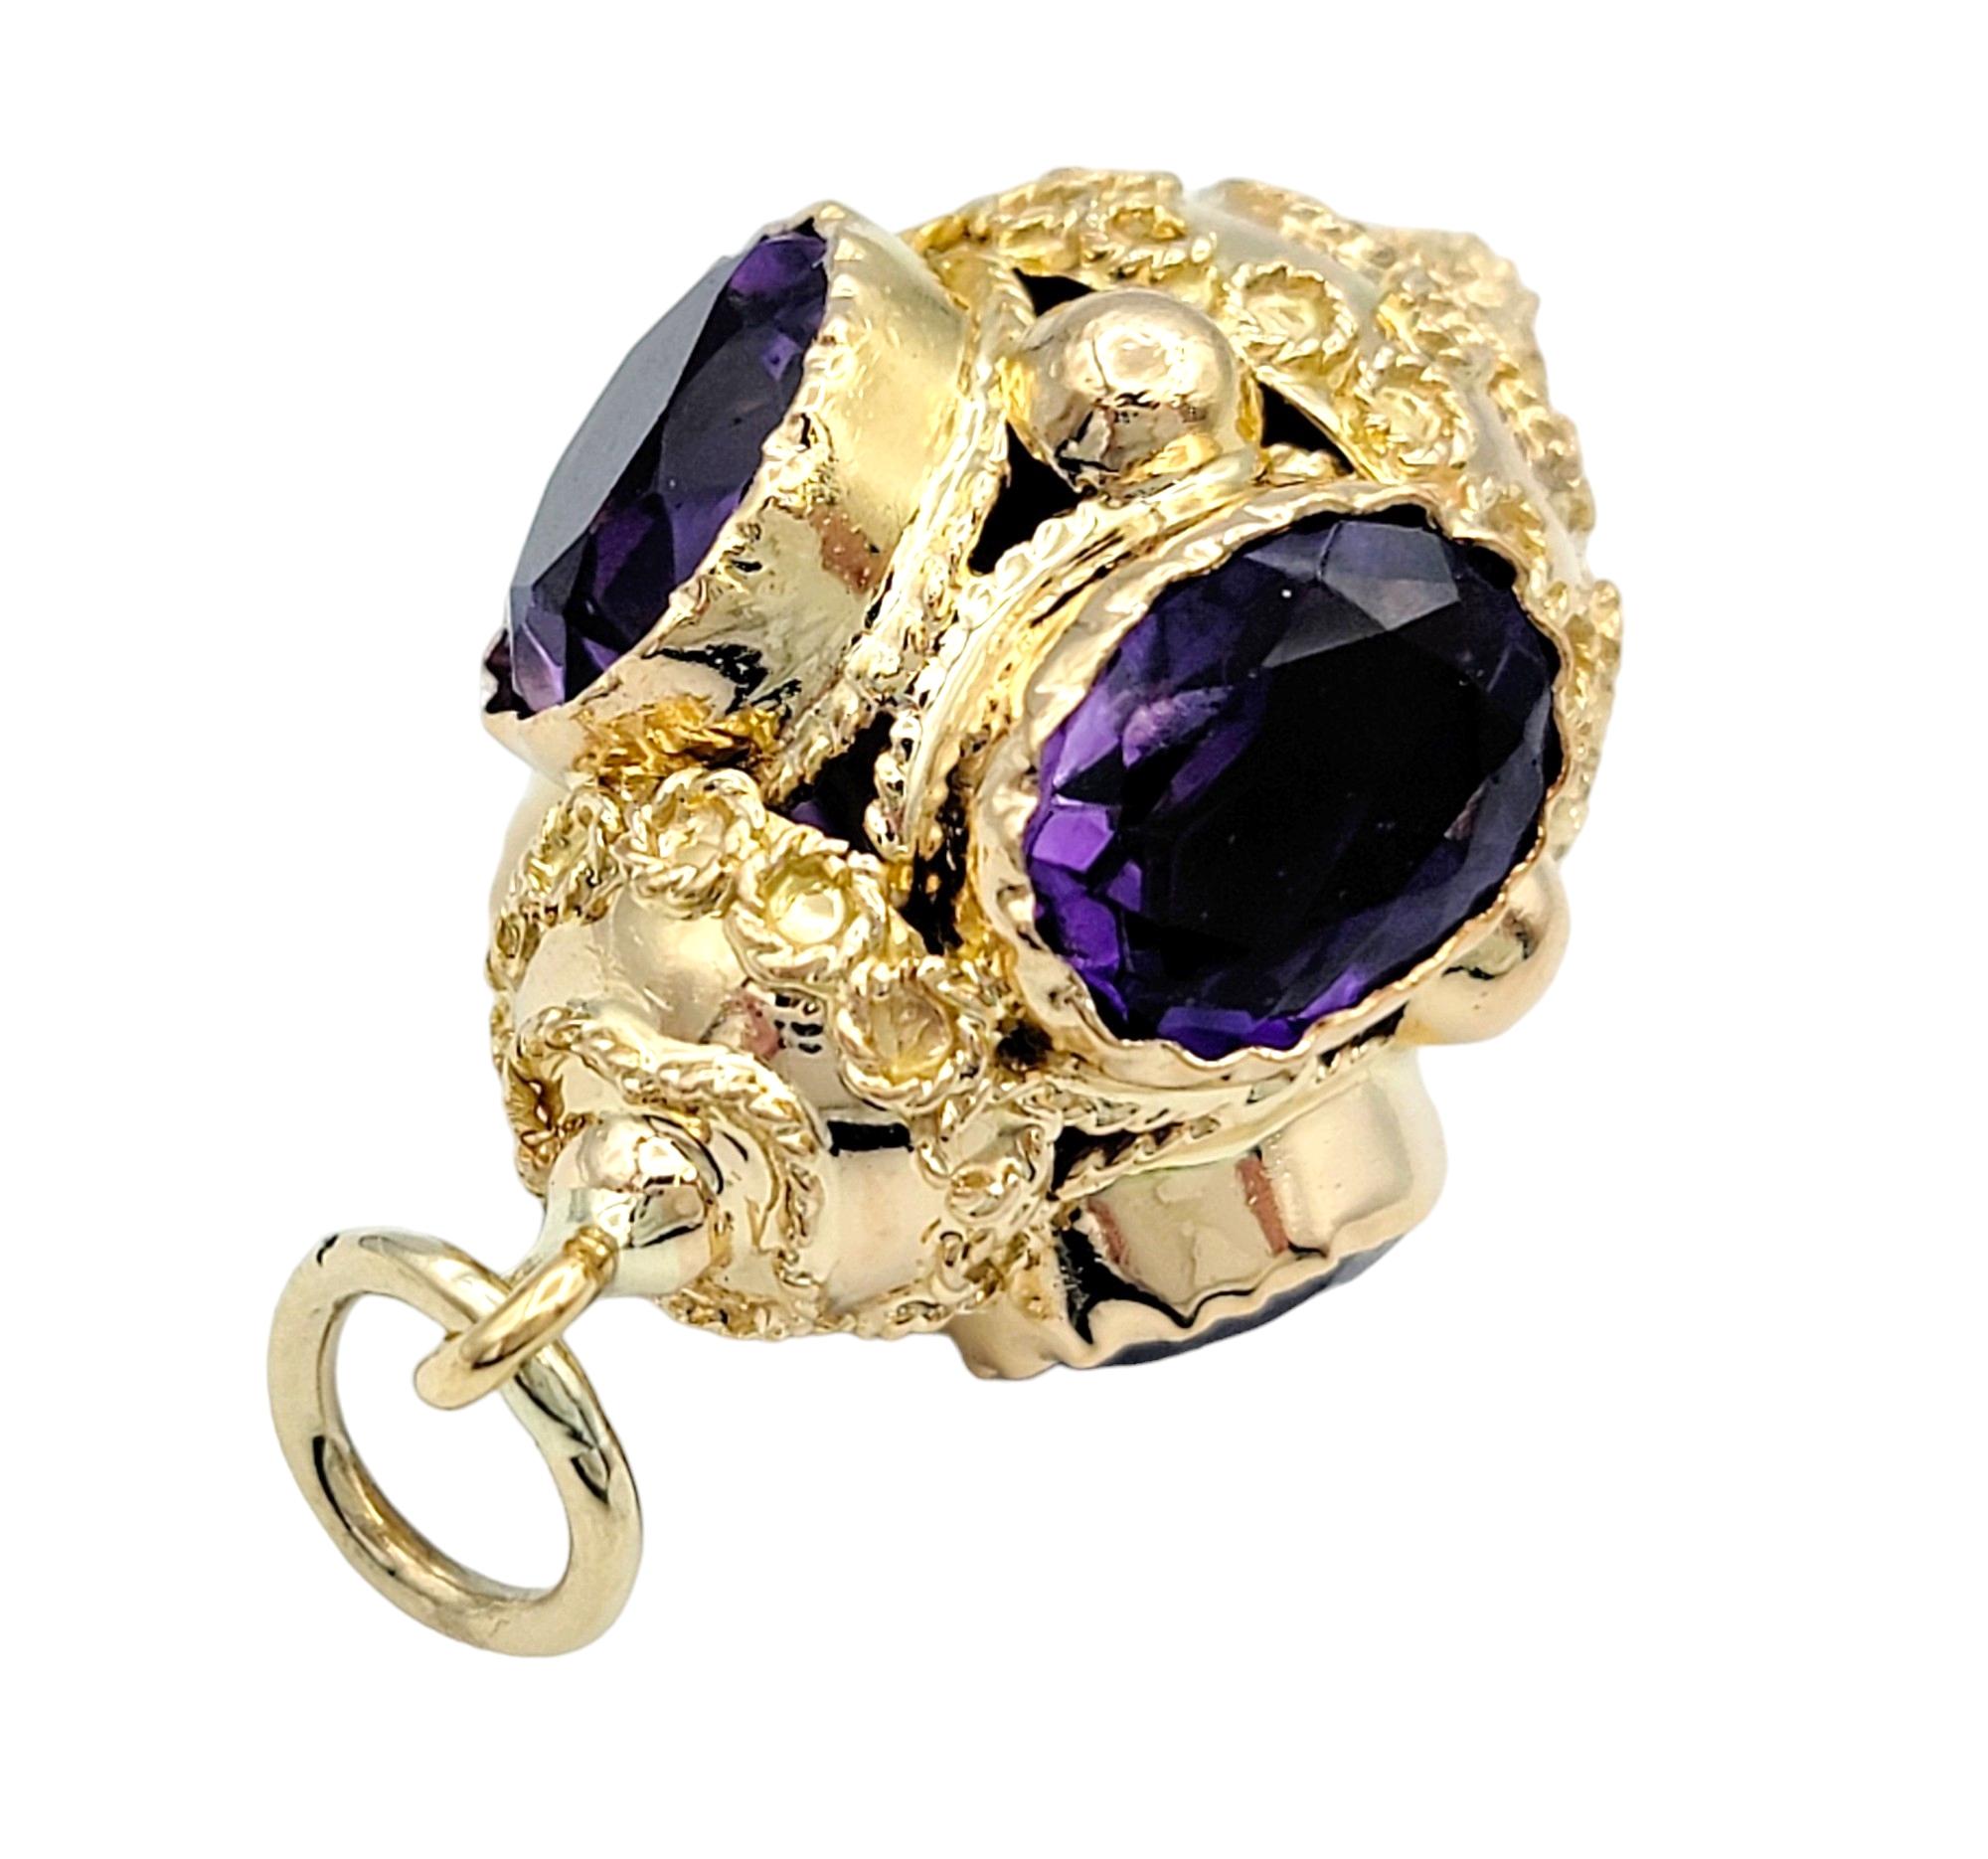 Purple Oval Cut Amethyst Pendant with Milgrain Detail in 18 Karat Yellow Gold In Good Condition For Sale In Scottsdale, AZ